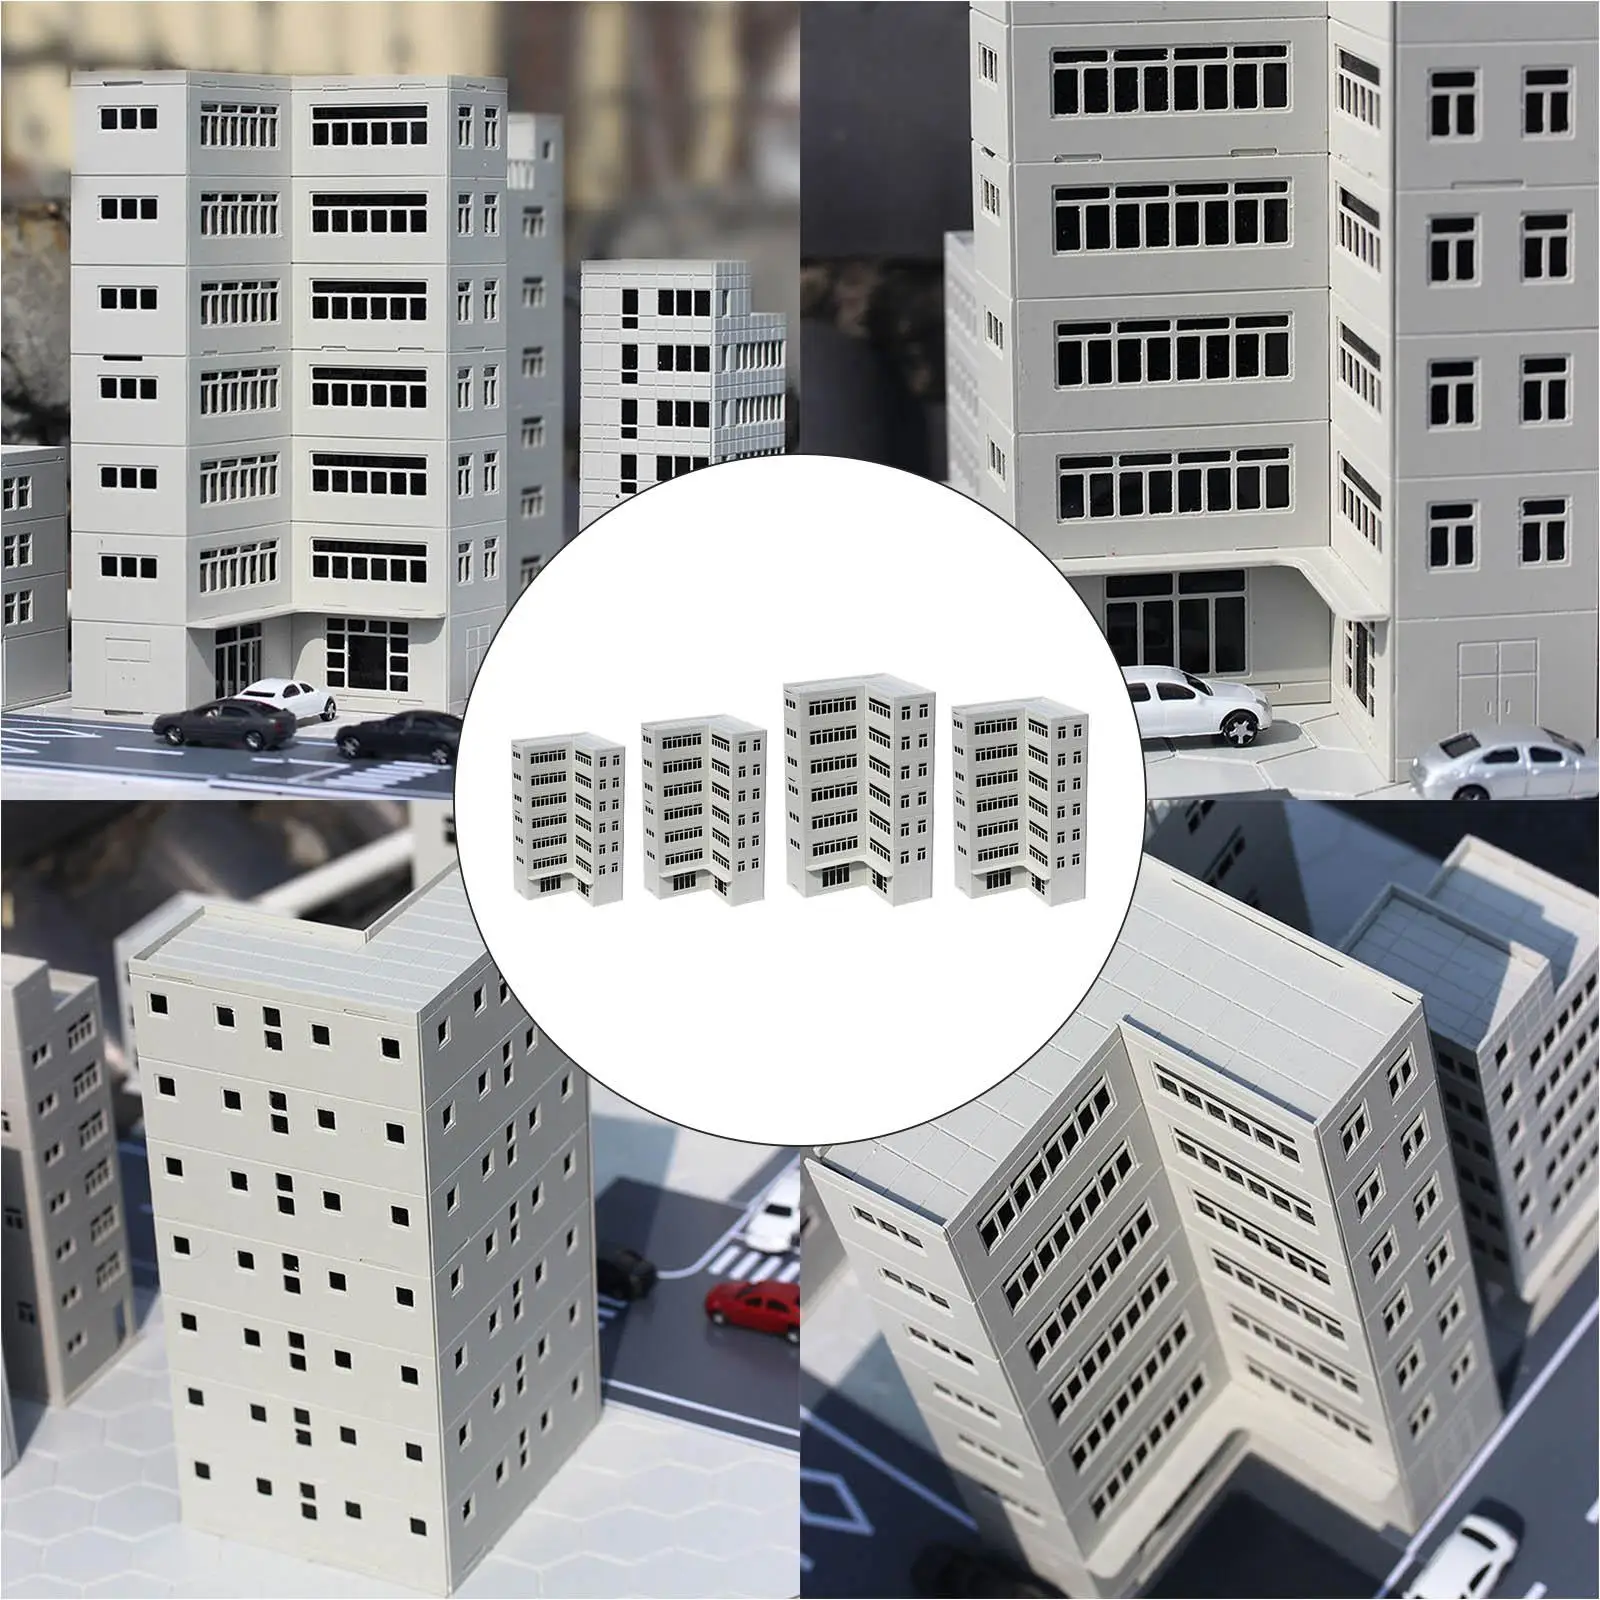  Railway Layout Miniature Architectural Buildings for Decoration Layout